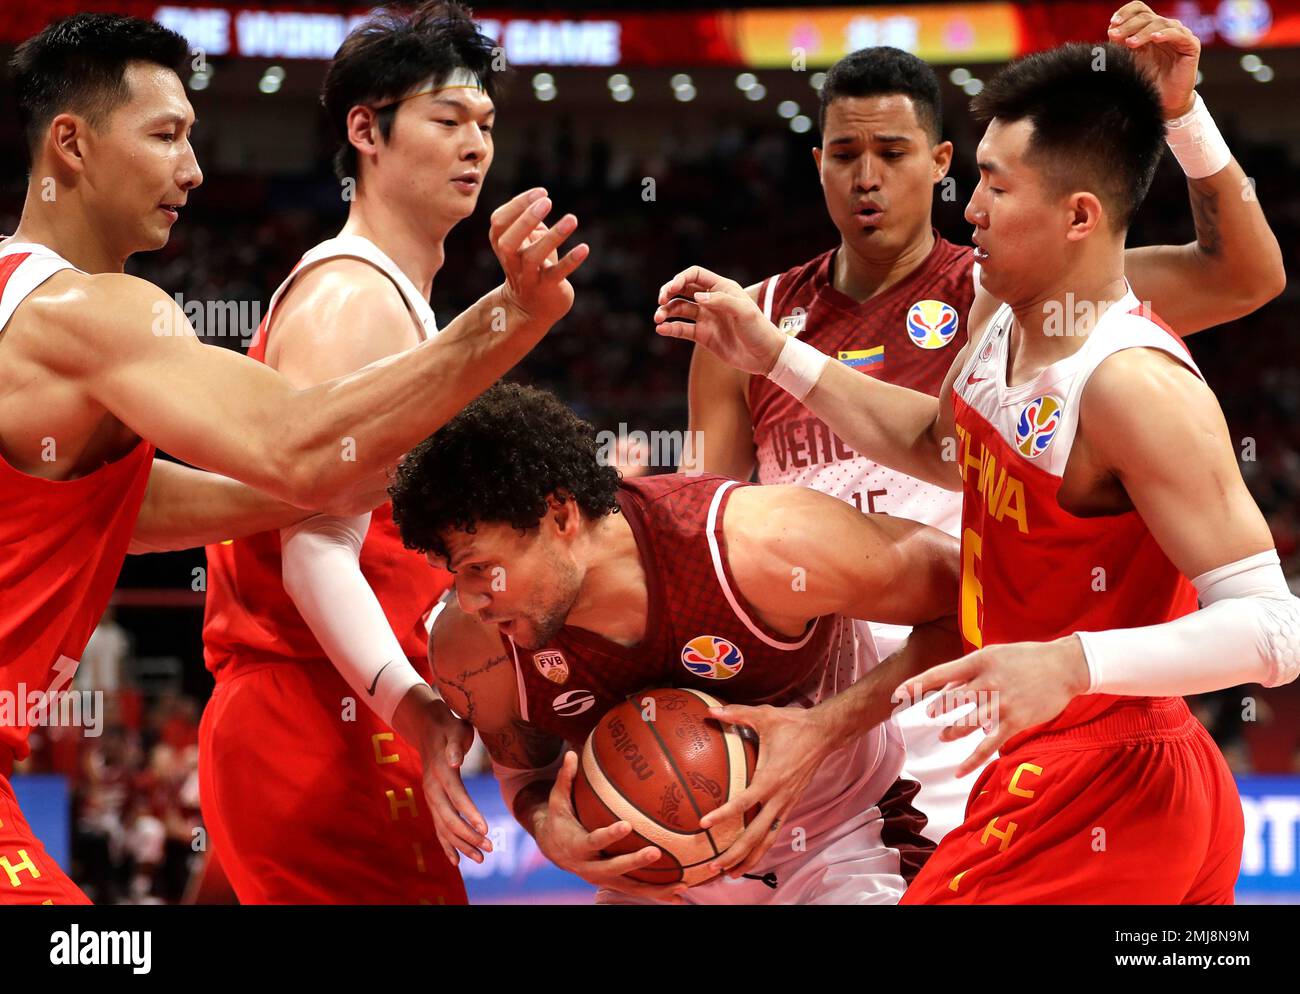 Michael Carrera of Venezuela battles for control of a loose ball with, from  left, Yi Jianlian, Wang Zhelin, and Guo Ailun of China during their group  phase basketball game in the FIBA